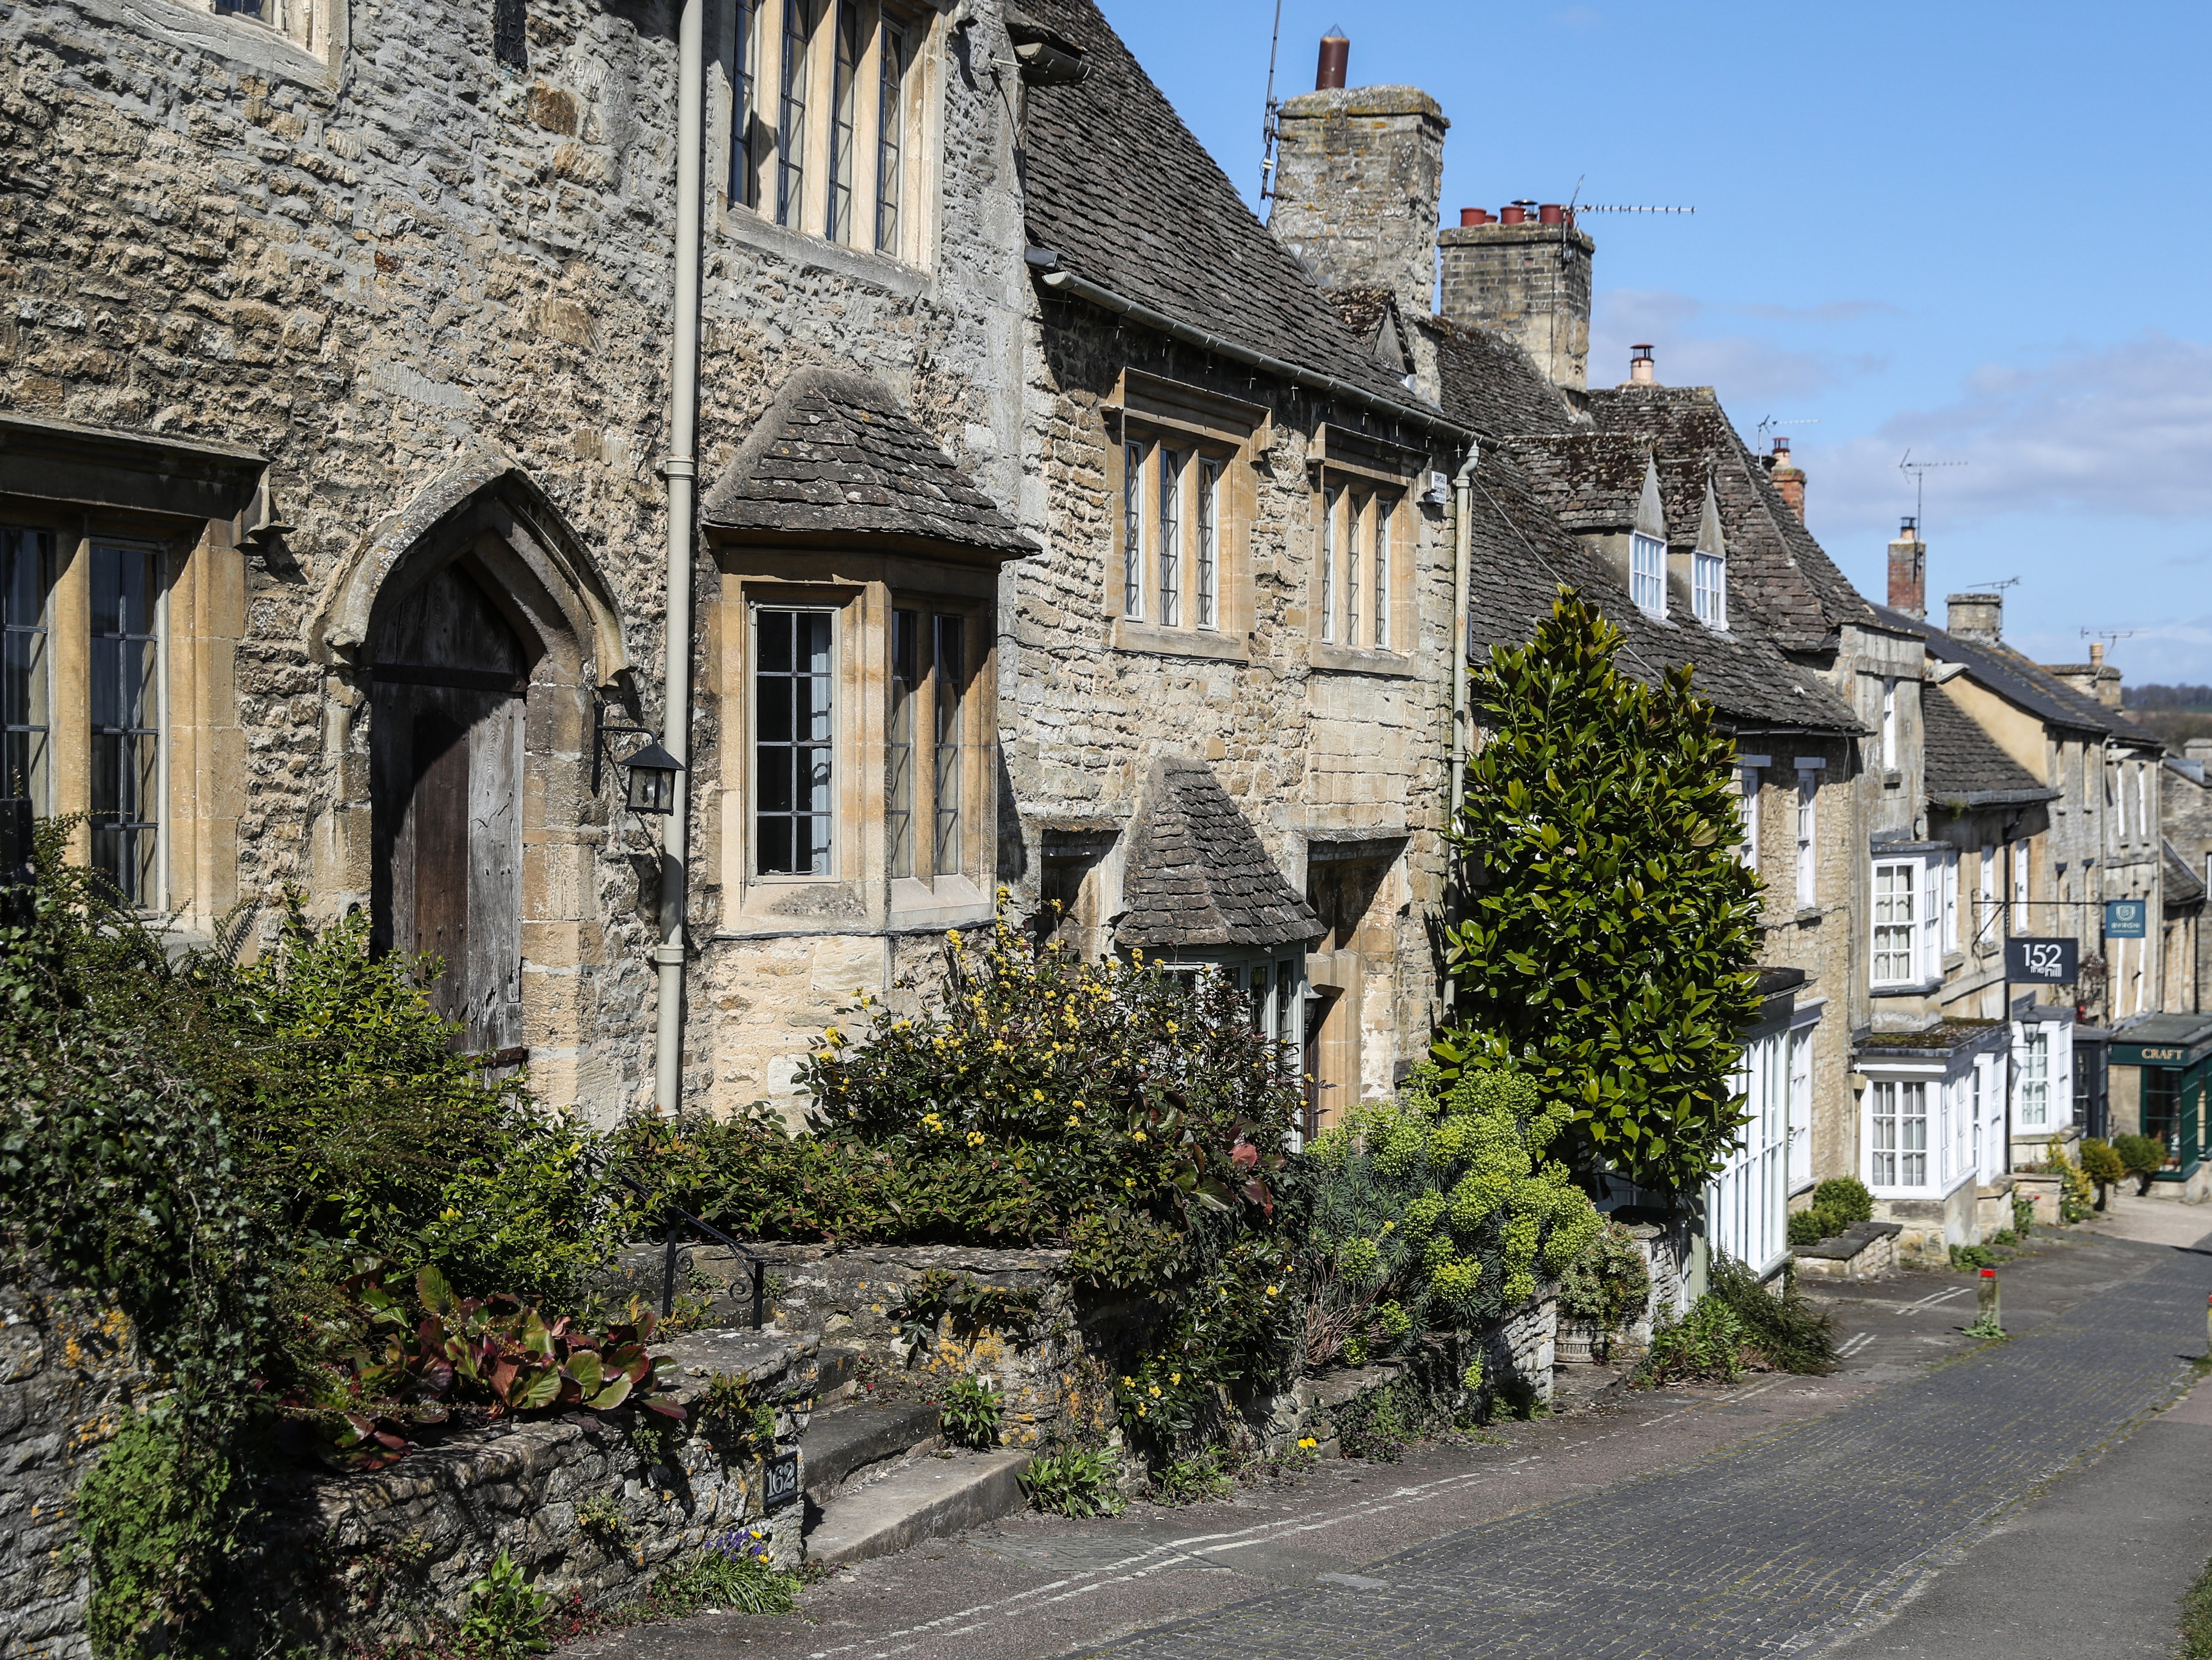 Prime country homes in the Cotswolds saw a price growth of 23.4 percent